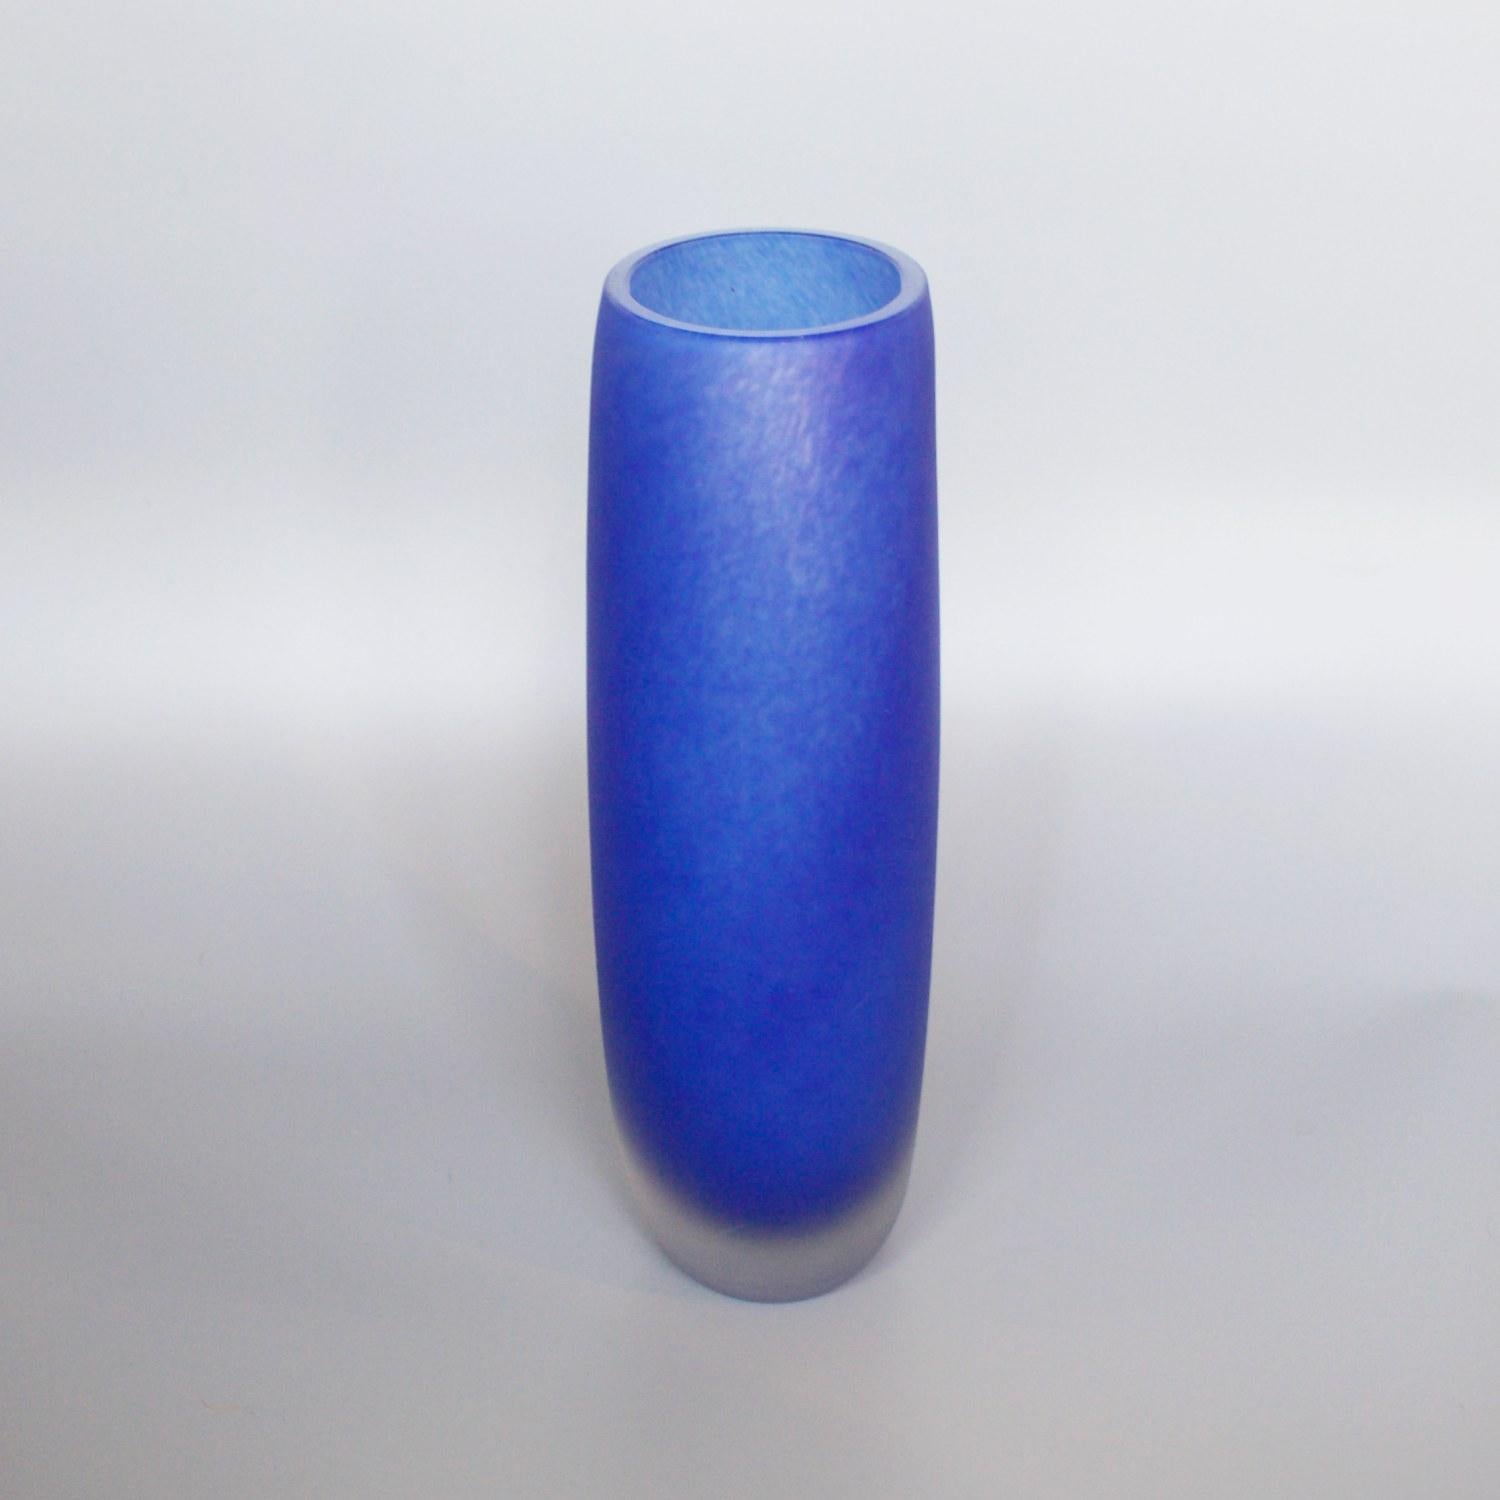 A frosted blue glass Murano vase by Ercole Barovier for Barovier & Toso in Murano Italy. Signed to underneath. 

Dimensions: H 33cm, W 14cm, D 9.5cm

Origin: Italy

Date: circa 1970s

Barovier & Toso is the oldest glass company in Italy,